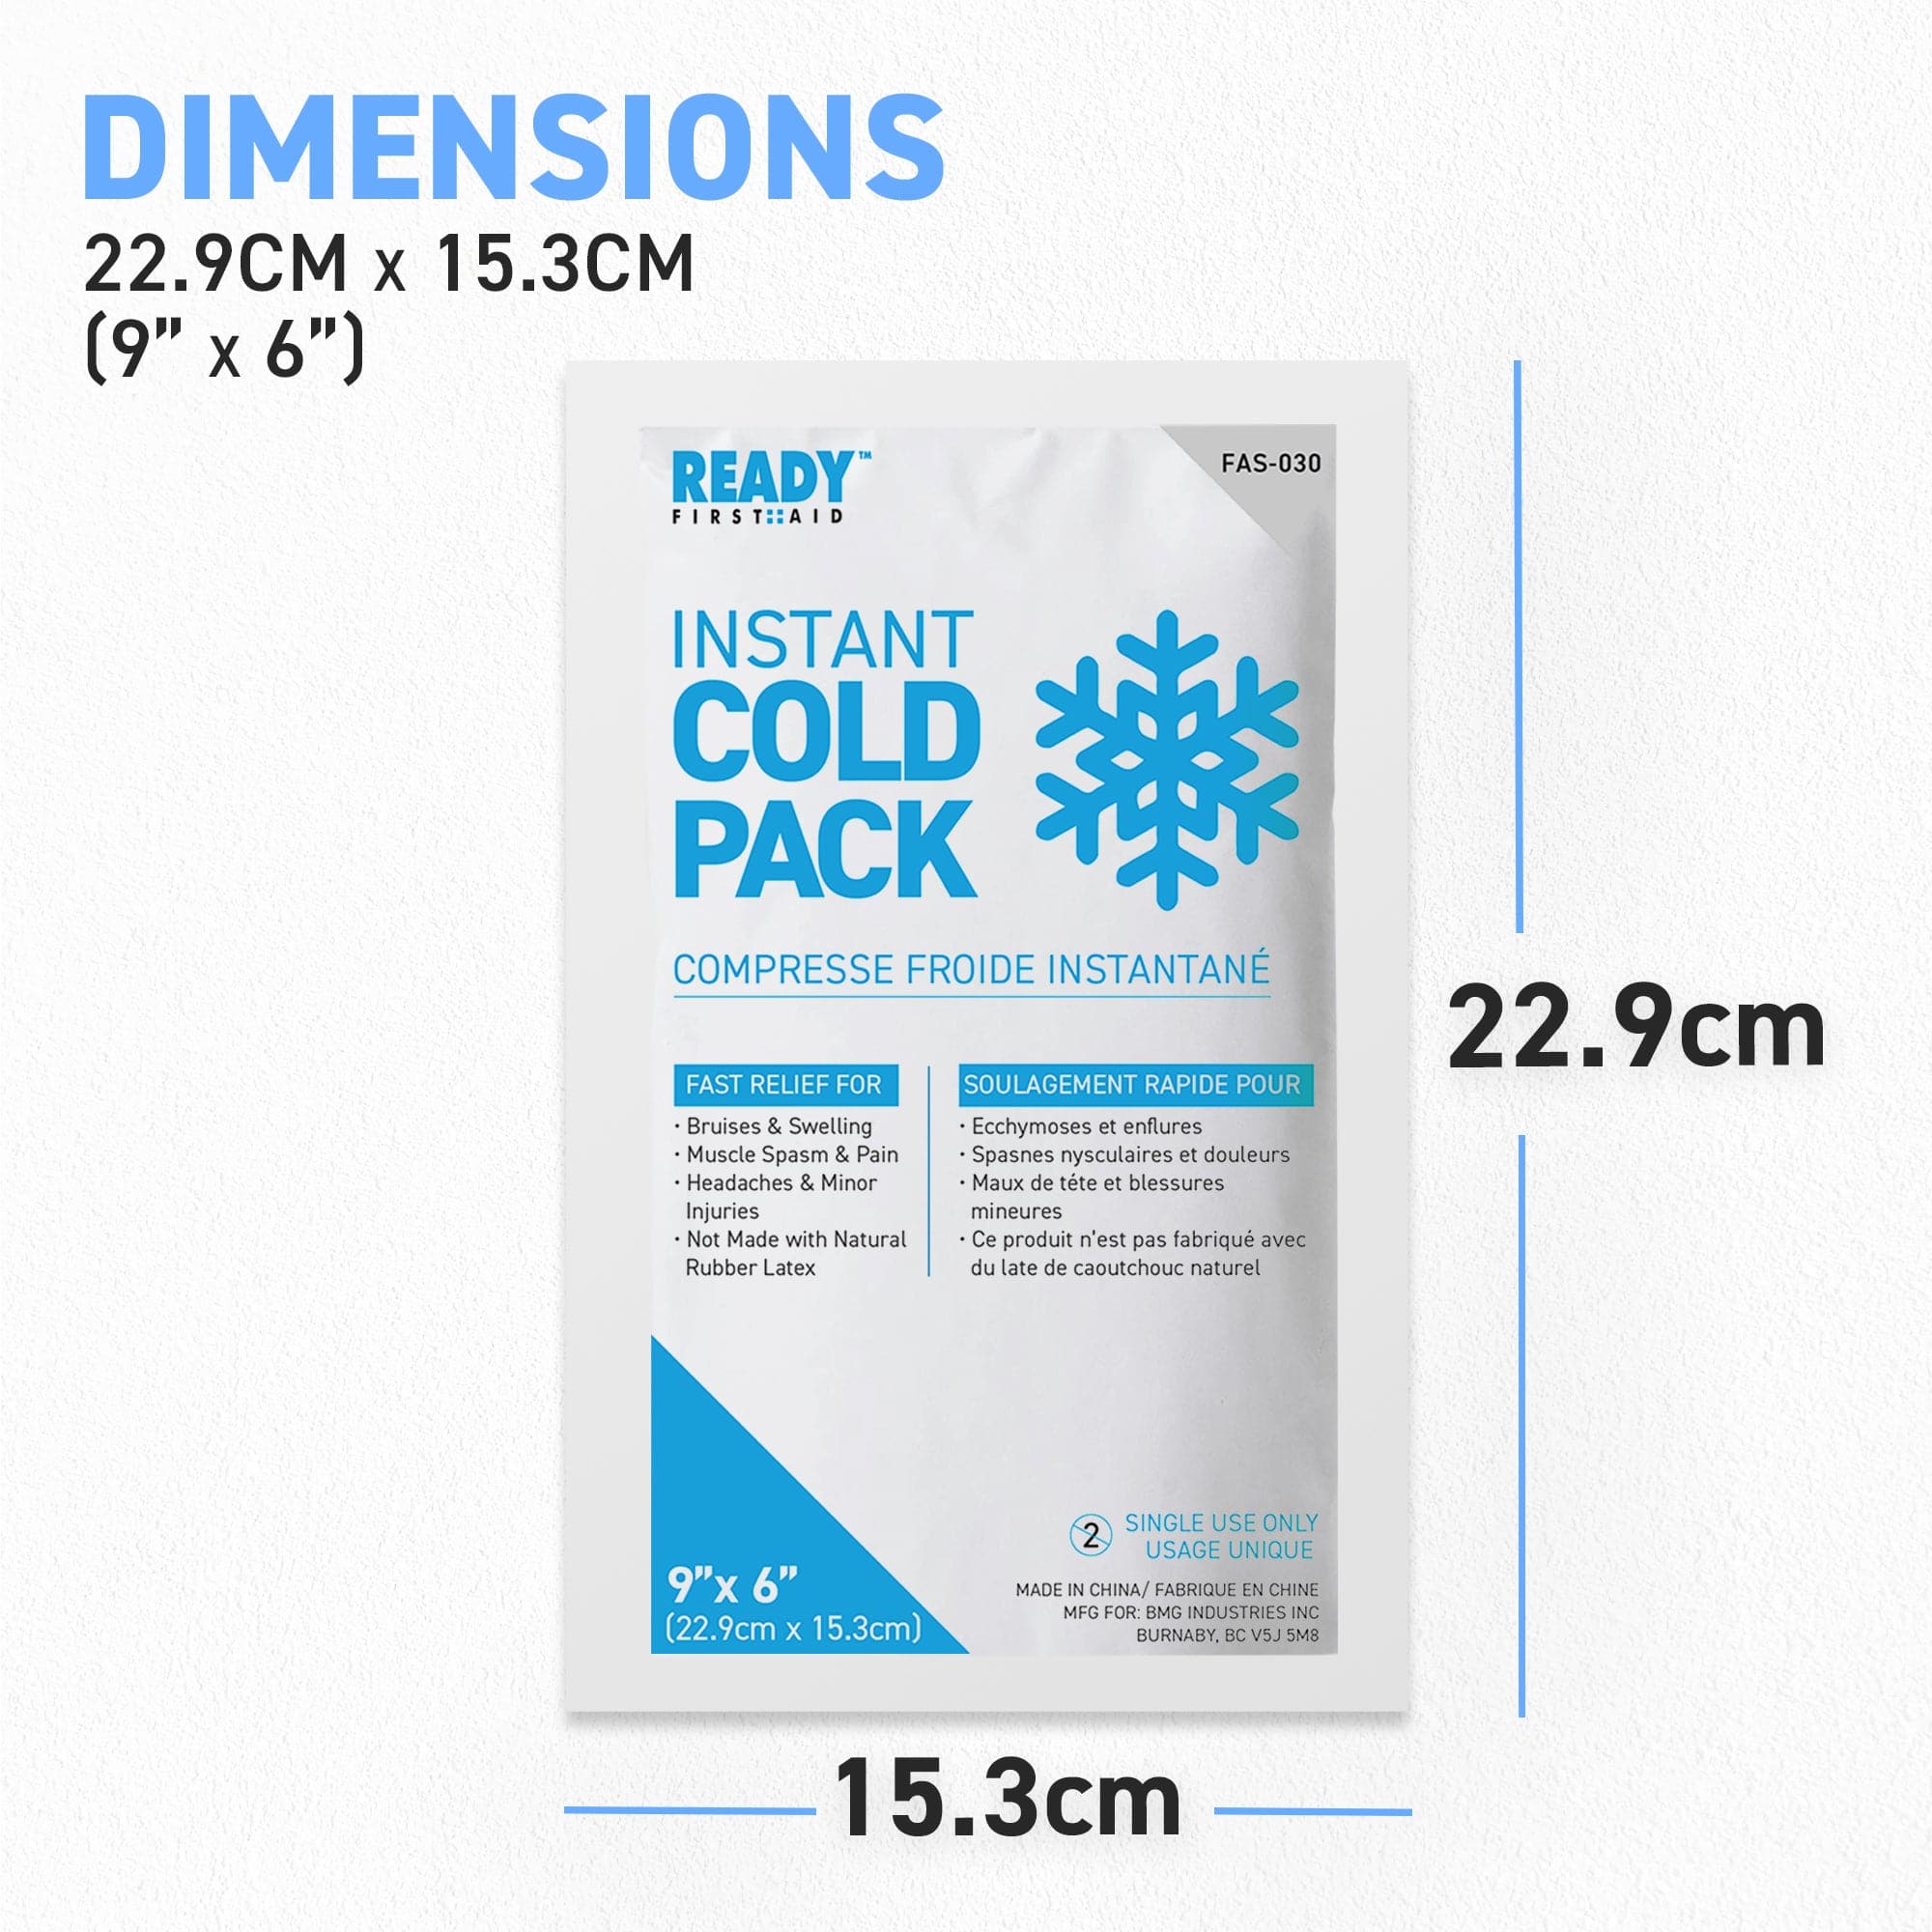 COOL Instant Cold Pack - First Aid Kit Size, 5 x 6 - 50/Case  (Individually Boxed)